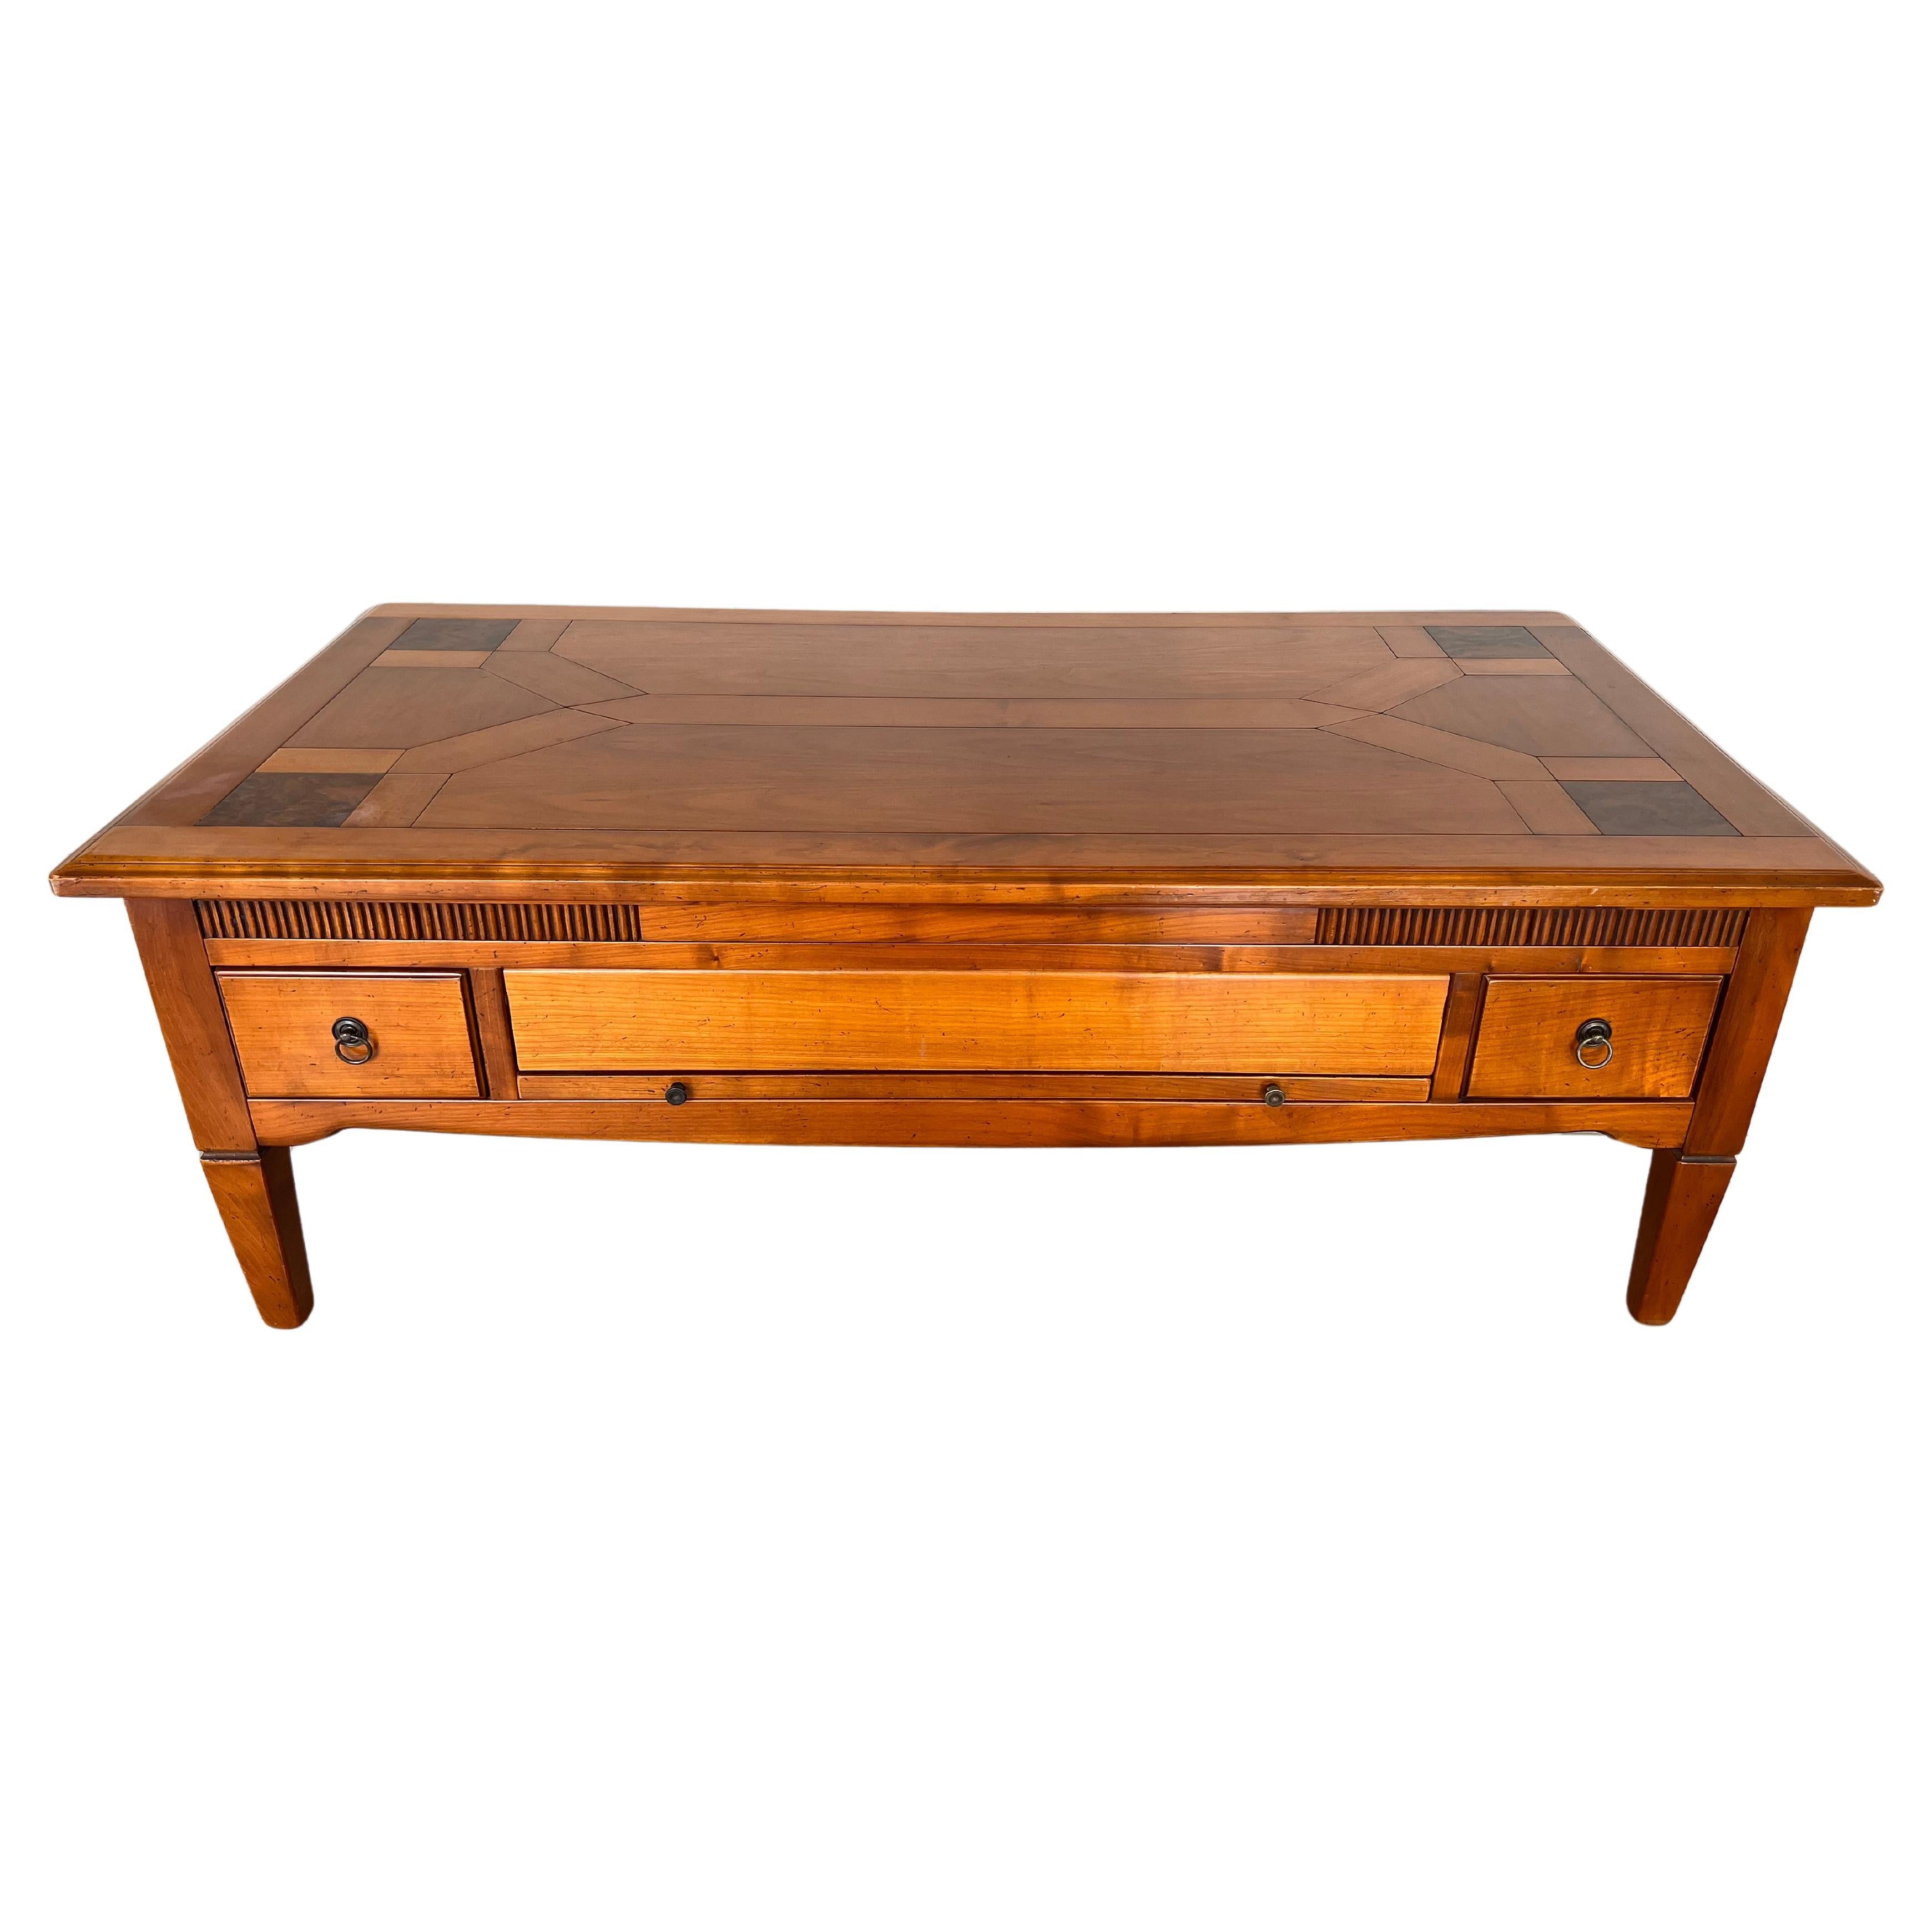 French Colonial Mid-Century Modern Style Coffee Table With Drawers For Sale